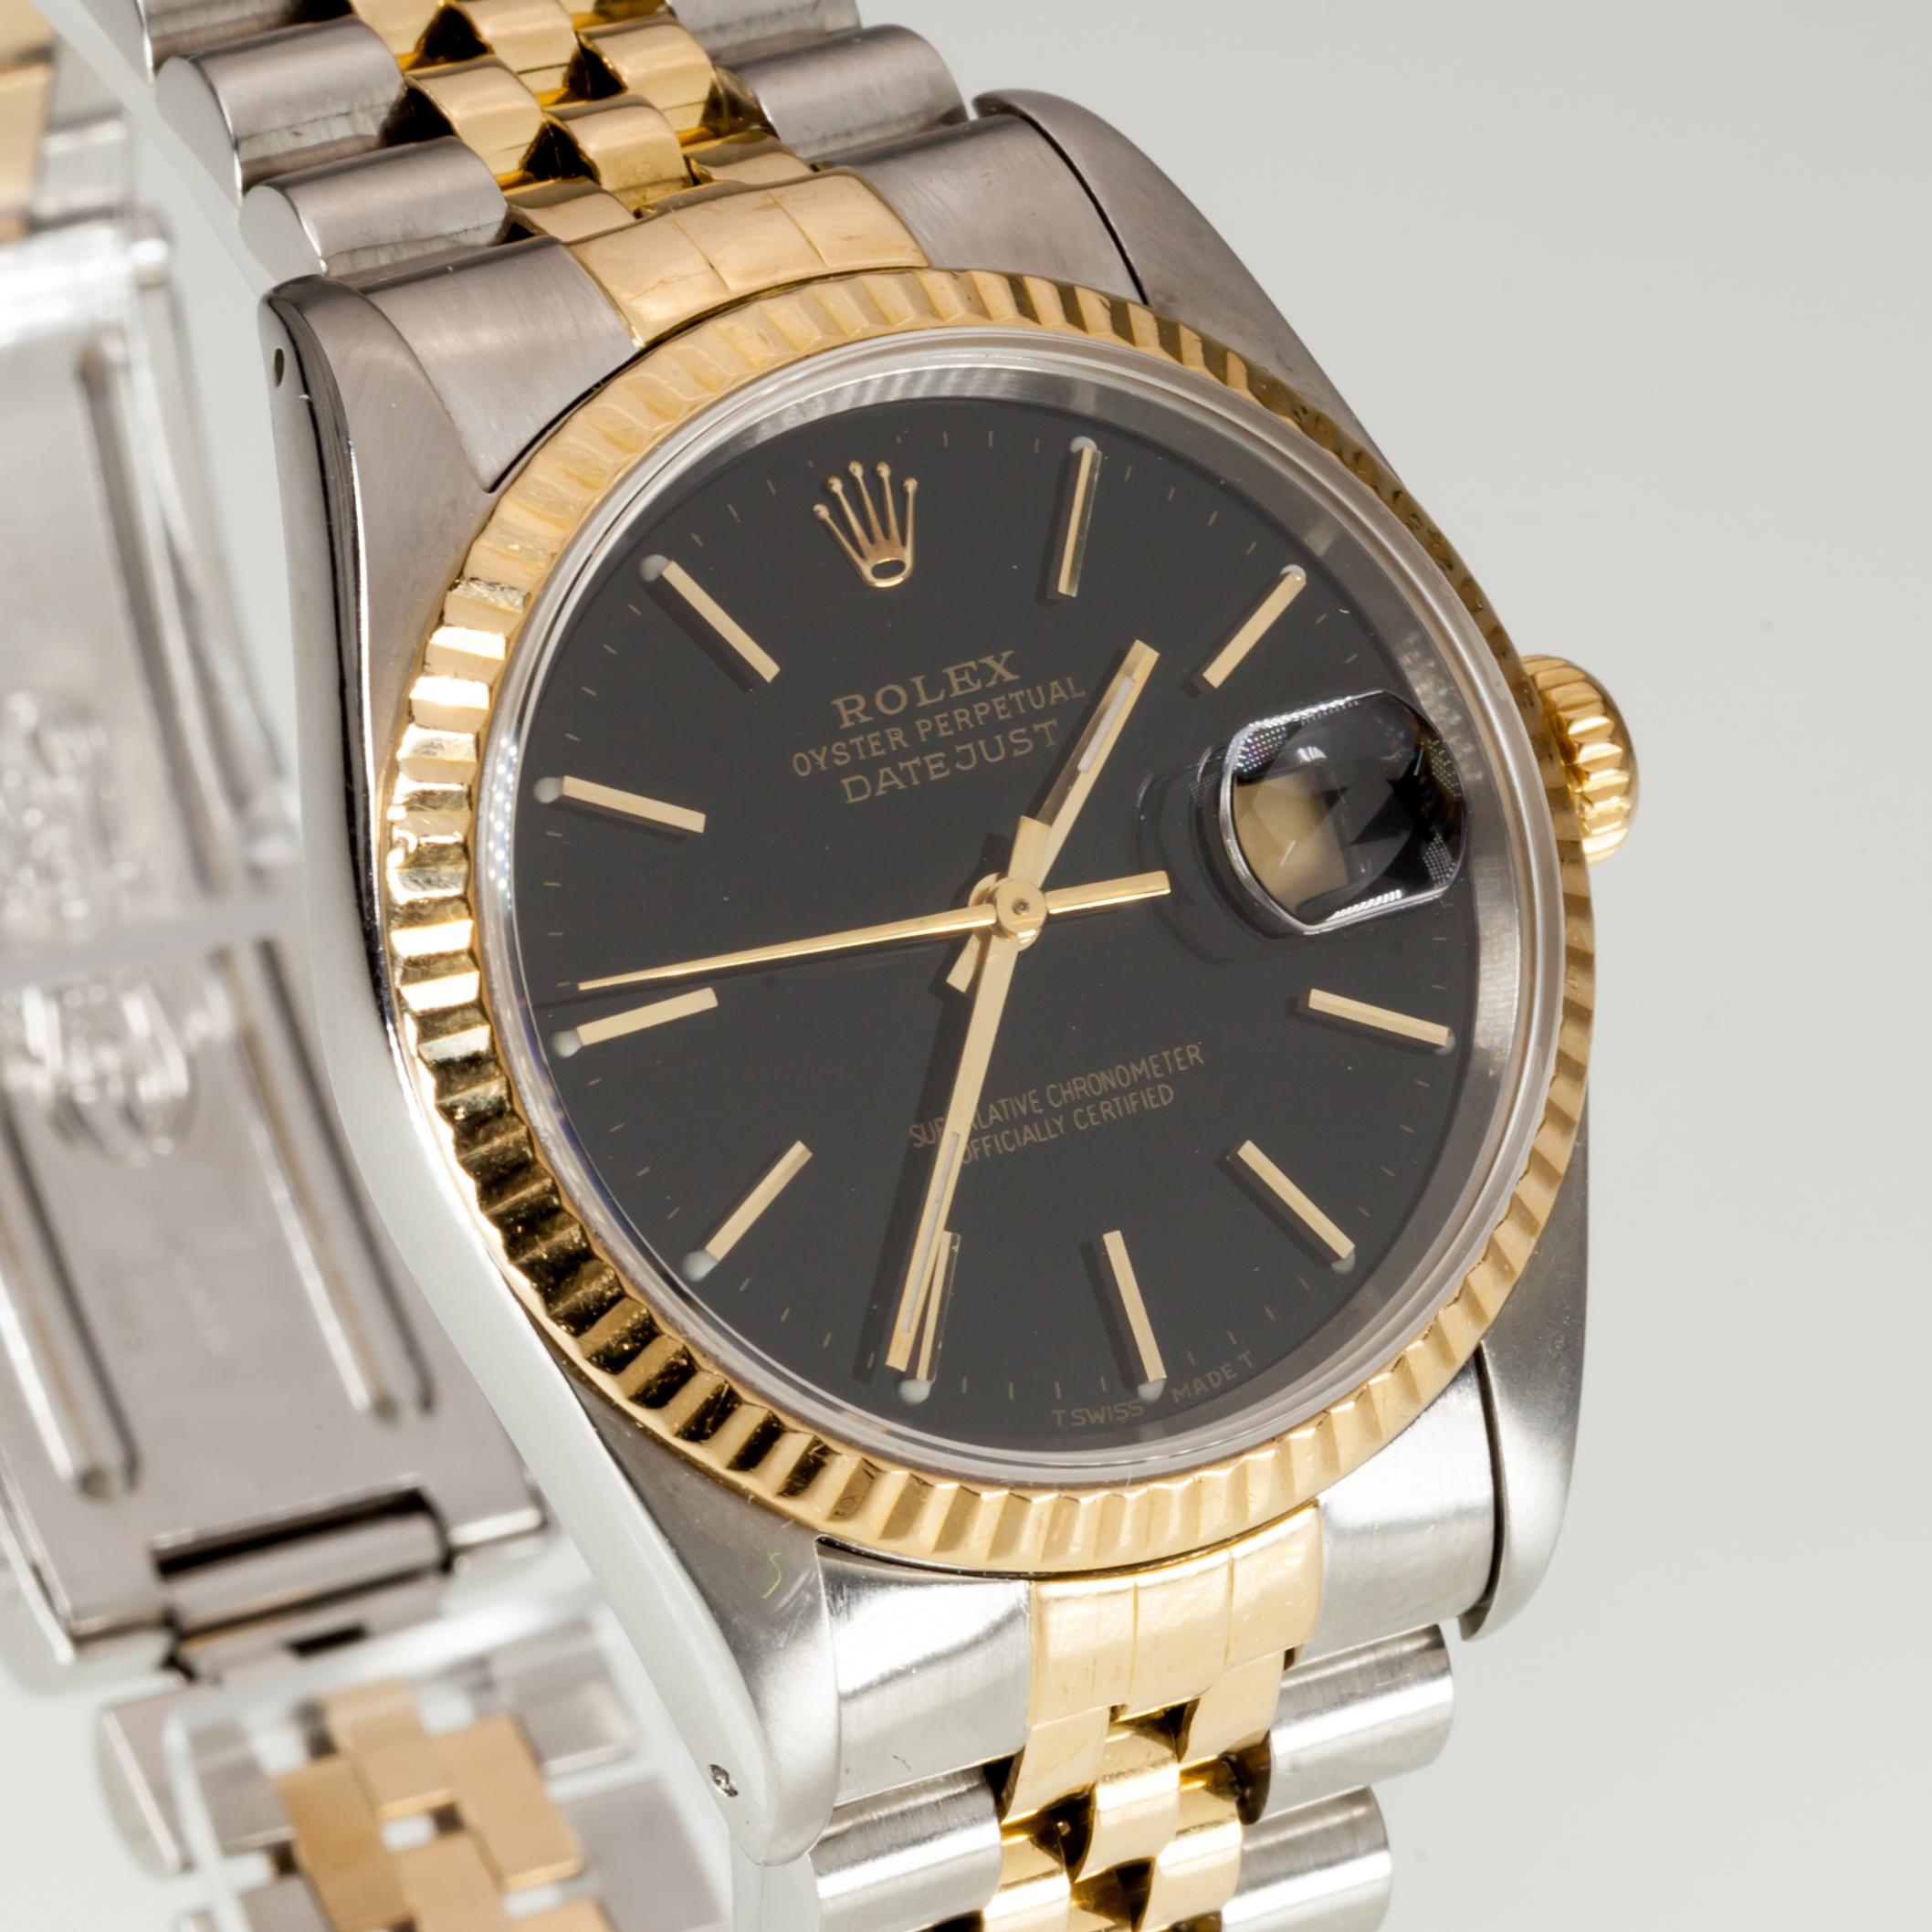 Modern Rolex Men's Two-Tone OPDJ 16233 Stainless and 18k Yellow Gold Automatic Watch